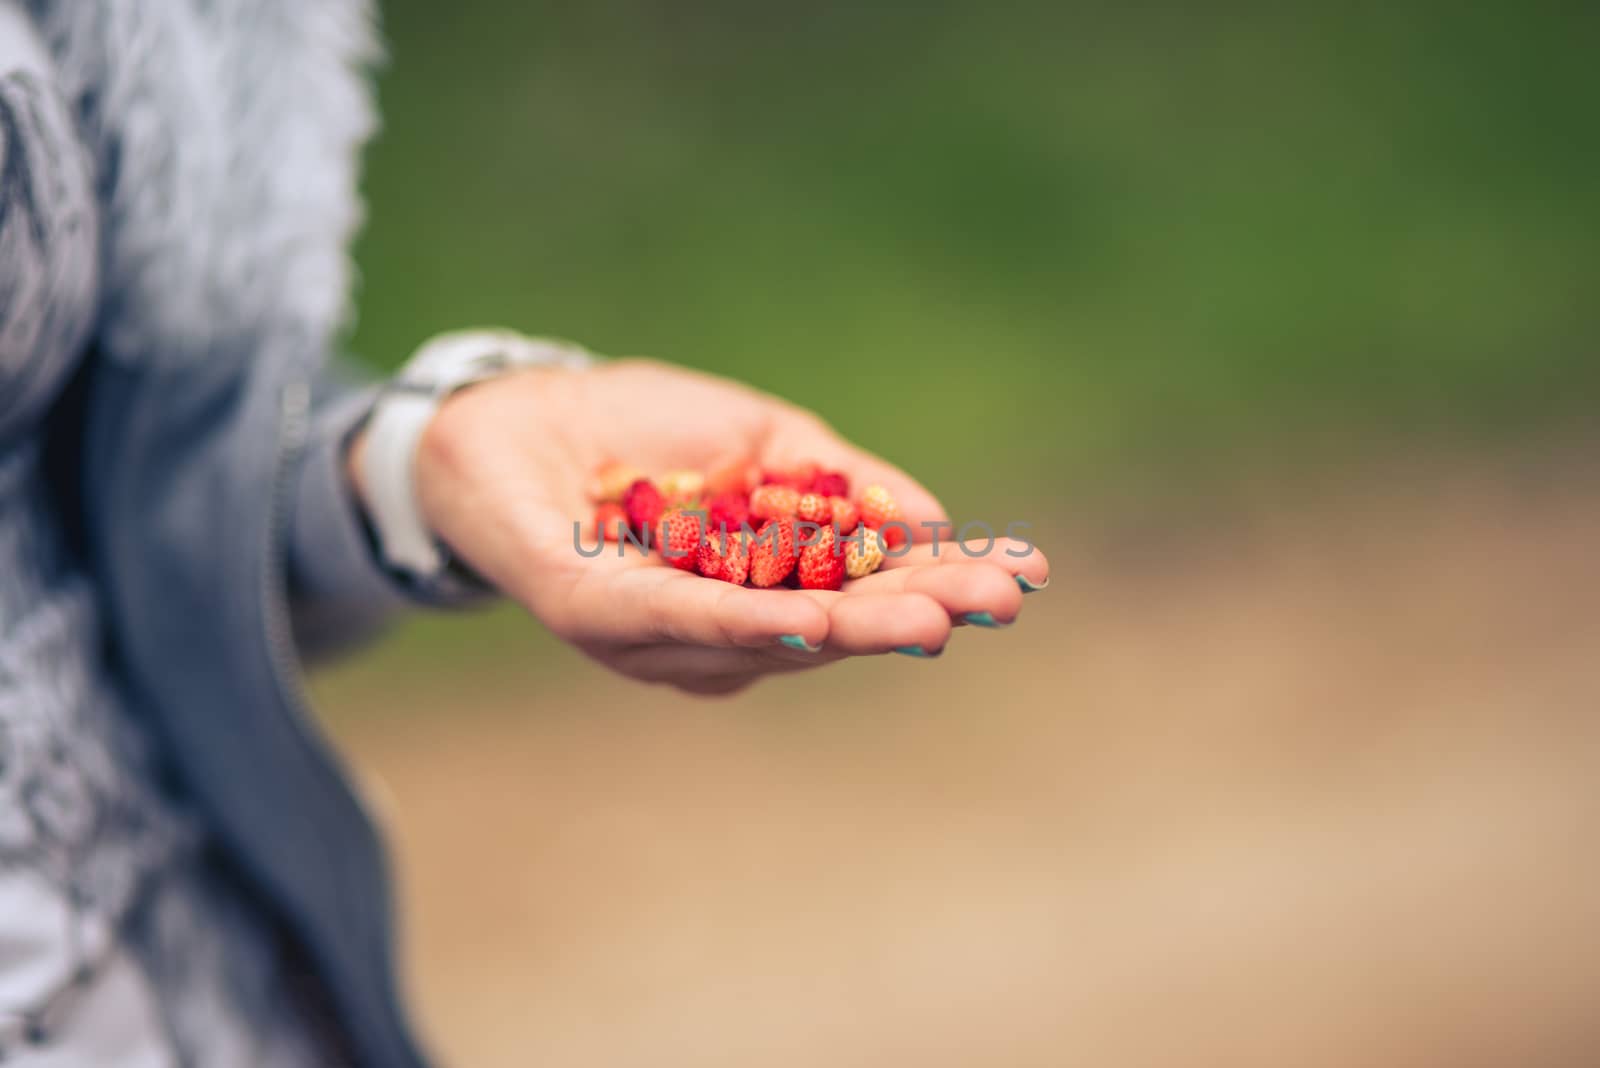 female hand holding a strawberry against blurred green background by skrotov